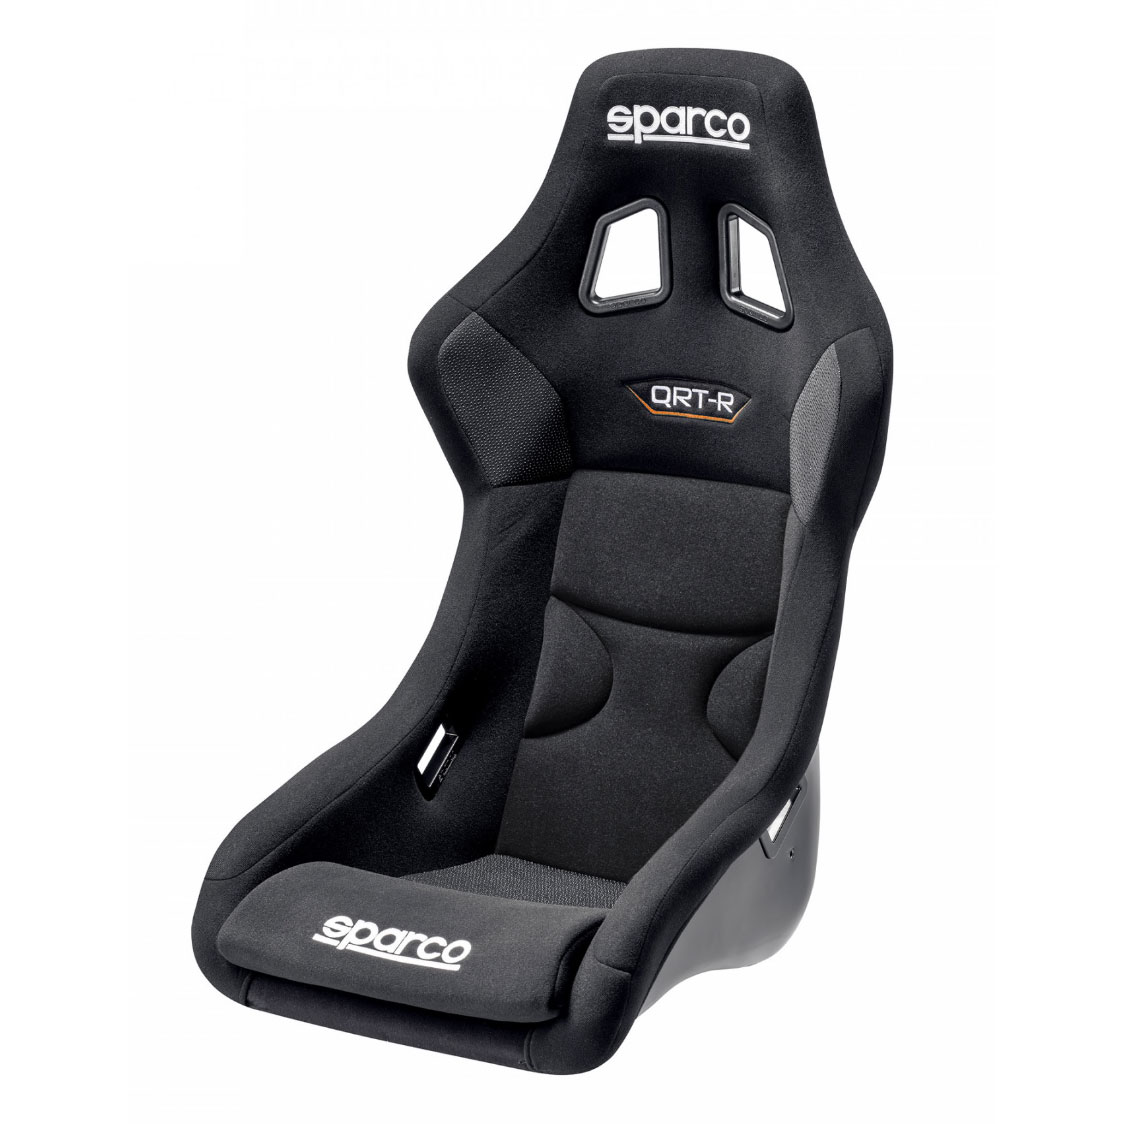 Sparco Gaming QRT-R Seat (Play Seat)